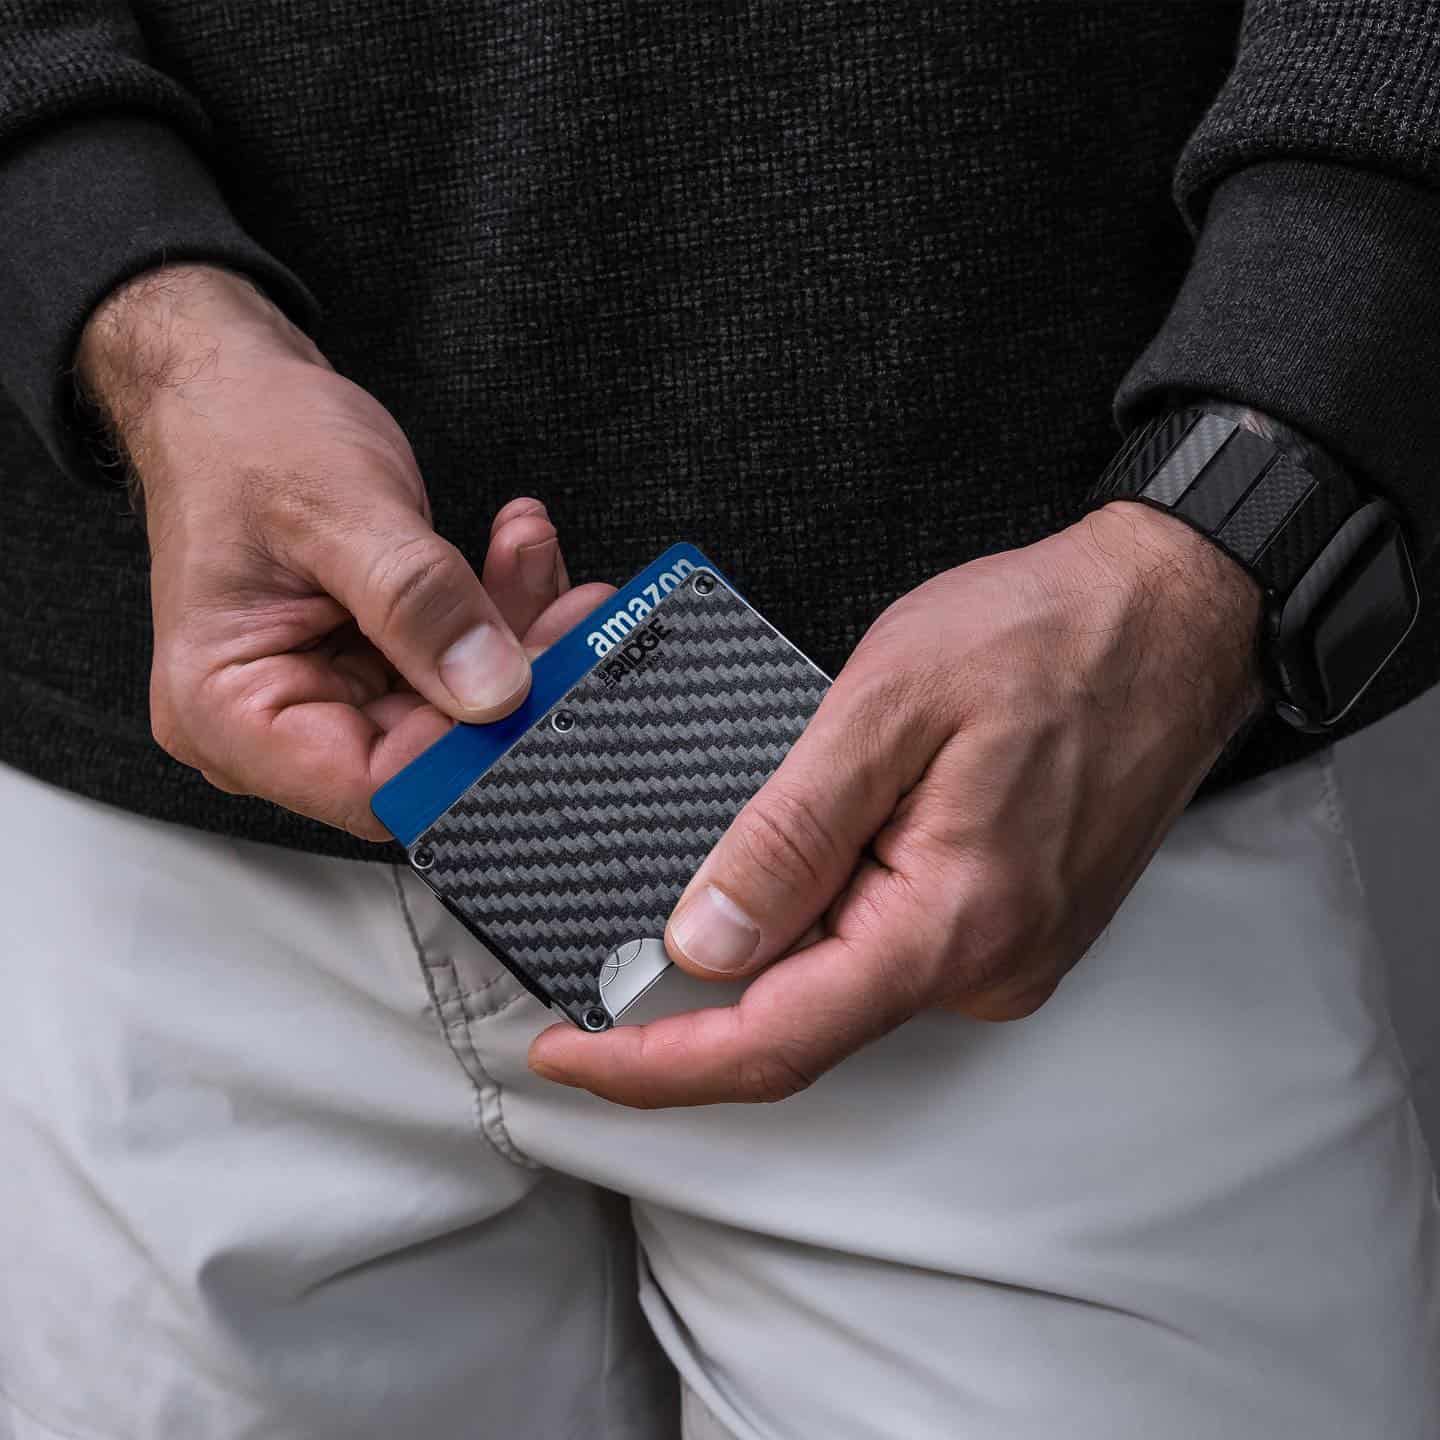 pulling out a card from a carbon fiber wallet